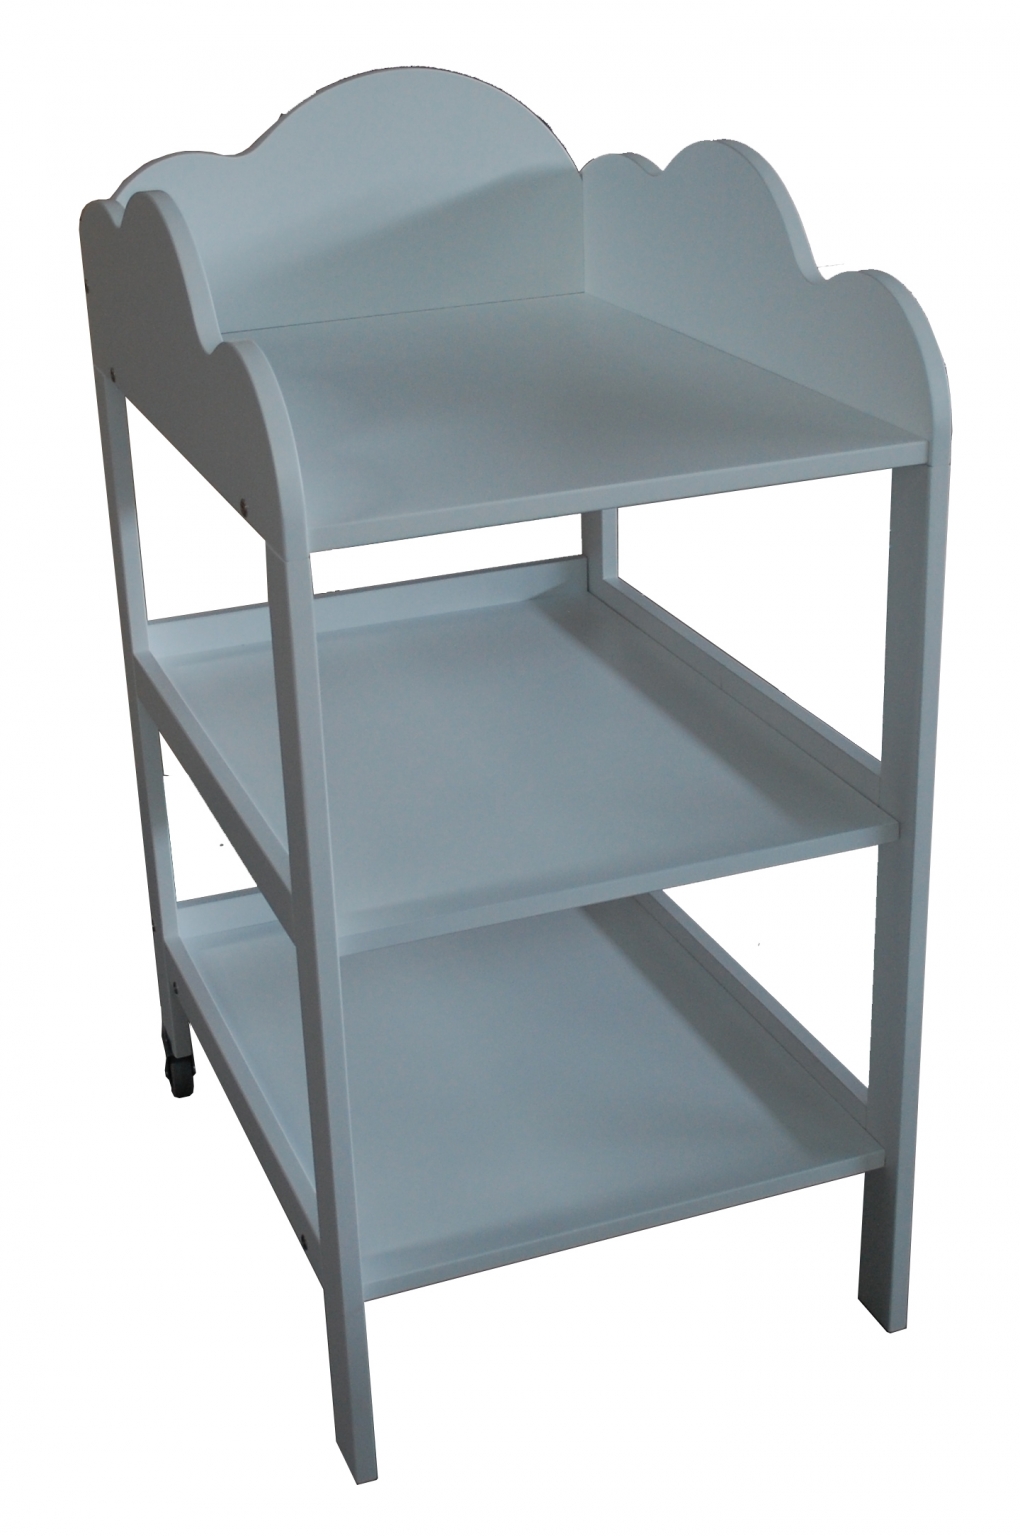 Nuage Changing Table